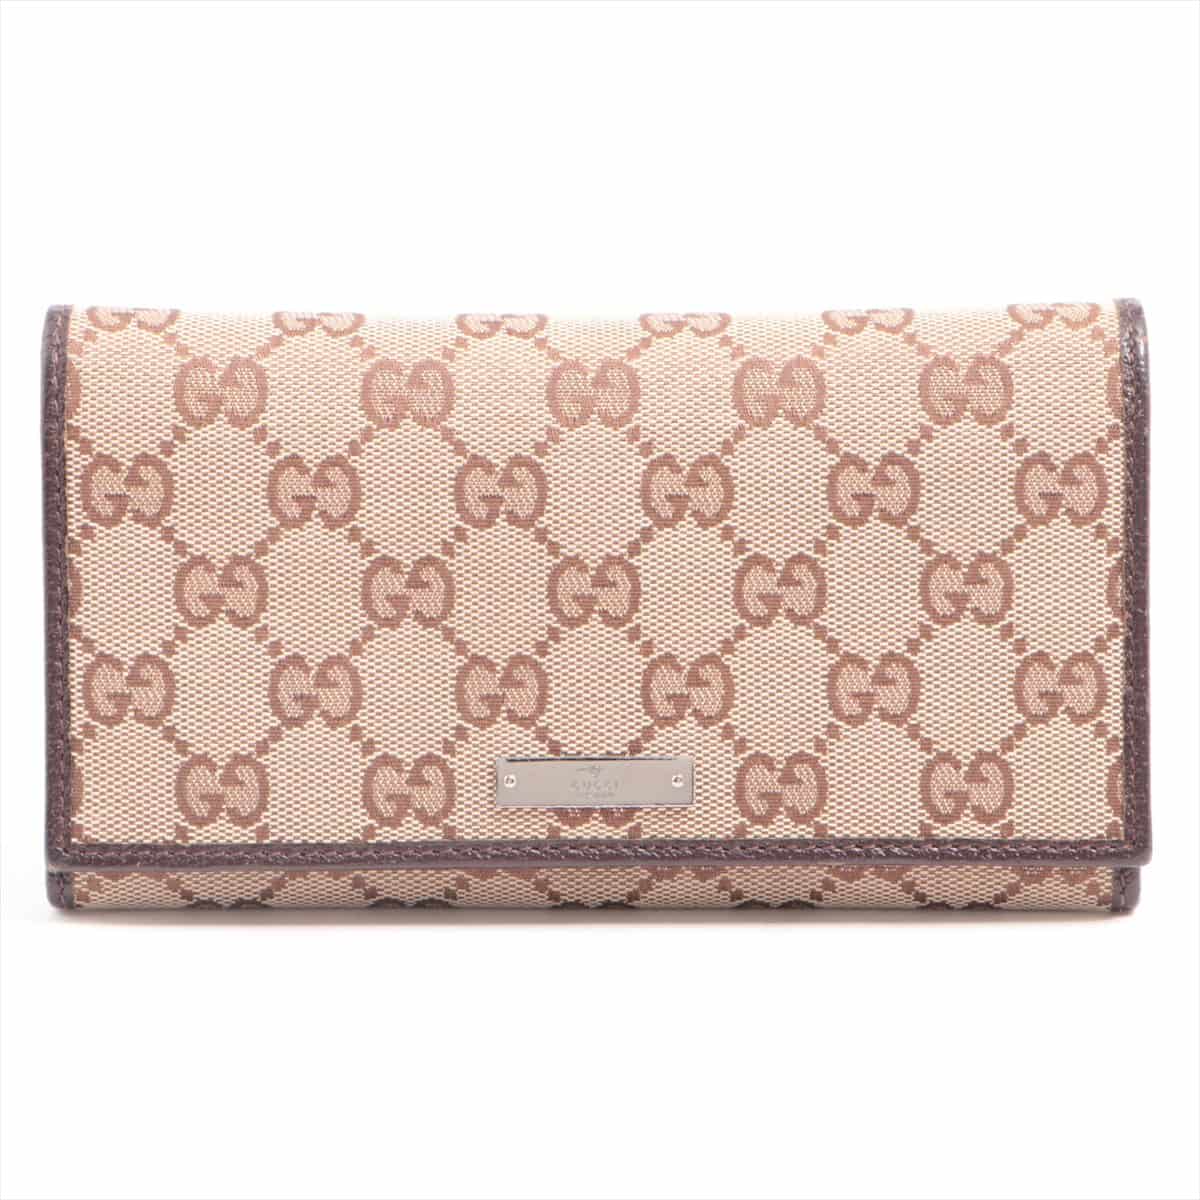 Gucci GG Canvas 244946 Canvas & leather Wallet Beige